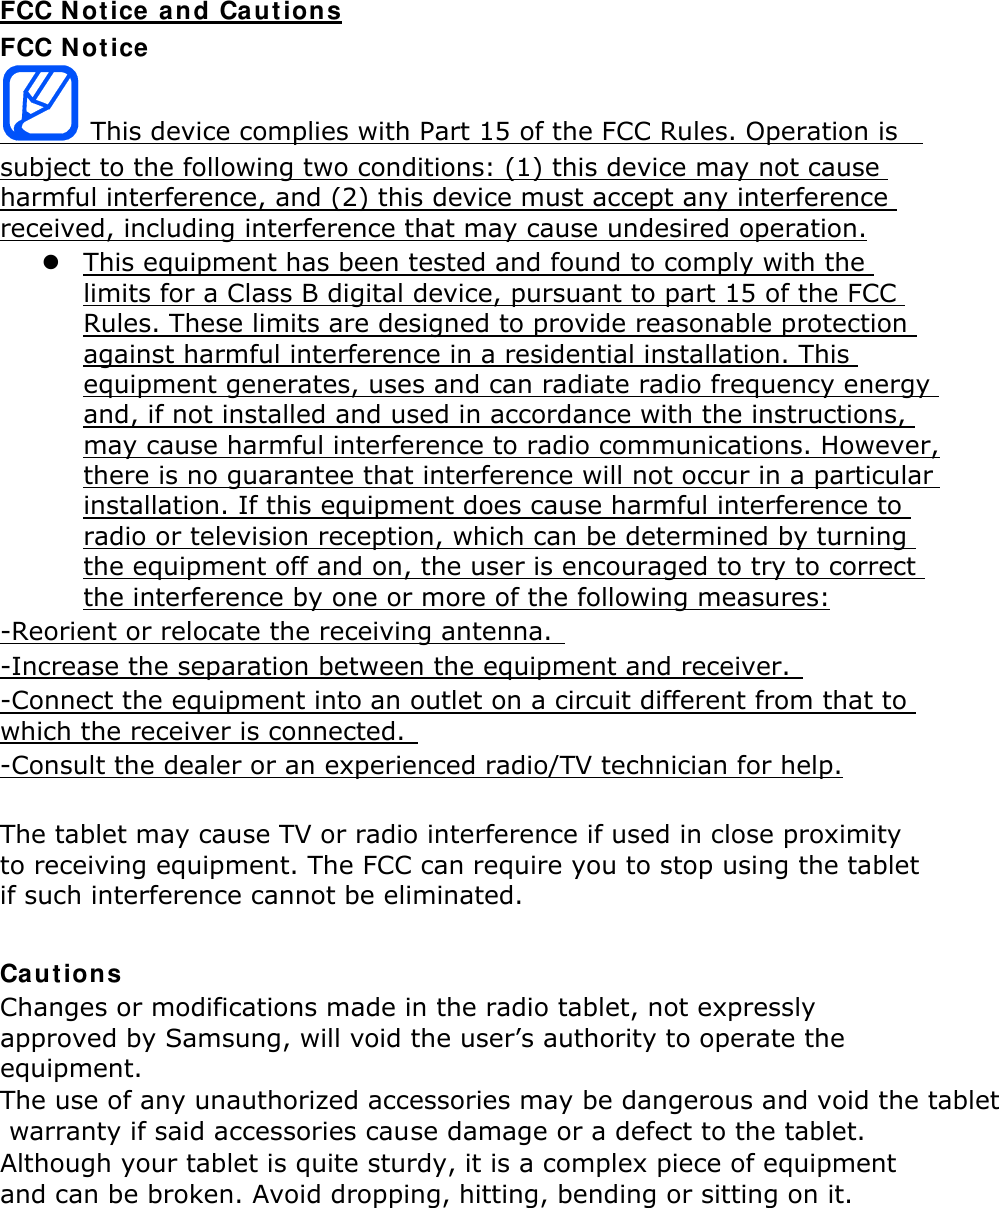 FCC Notice and Cautions FCC Notice  This device complies with Part 15 of the FCC Rules. Operation is   subject to the following two conditions: (1) this device may not cause harmful interference, and (2) this device must accept any interference received, including interference that may cause undesired operation.  This equipment has been tested and found to comply with the limits for a Class B digital device, pursuant to part 15 of the FCC Rules. These limits are designed to provide reasonable protection against harmful interference in a residential installation. This equipment generates, uses and can radiate radio frequency energy and, if not installed and used in accordance with the instructions, may cause harmful interference to radio communications. However, there is no guarantee that interference will not occur in a particular installation. If this equipment does cause harmful interference to radio or television reception, which can be determined by turning the equipment off and on, the user is encouraged to try to correct the interference by one or more of the following measures: -Reorient or relocate the receiving antenna.   -Increase the separation between the equipment and receiver.   -Connect the equipment into an outlet on a circuit different from that to which the receiver is connected.   -Consult the dealer or an experienced radio/TV technician for help.  The tablet may cause TV or radio interference if used in close proximity to receiving equipment. The FCC can require you to stop using the tablet if such interference cannot be eliminated.  Cautions Changes or modifications made in the radio tablet, not expressly approved by Samsung, will void the user’s authority to operate the equipment. The use of any unauthorized accessories may be dangerous and void the tablet warranty if said accessories cause damage or a defect to the tablet. Although your tablet is quite sturdy, it is a complex piece of equipment and can be broken. Avoid dropping, hitting, bending or sitting on it.      